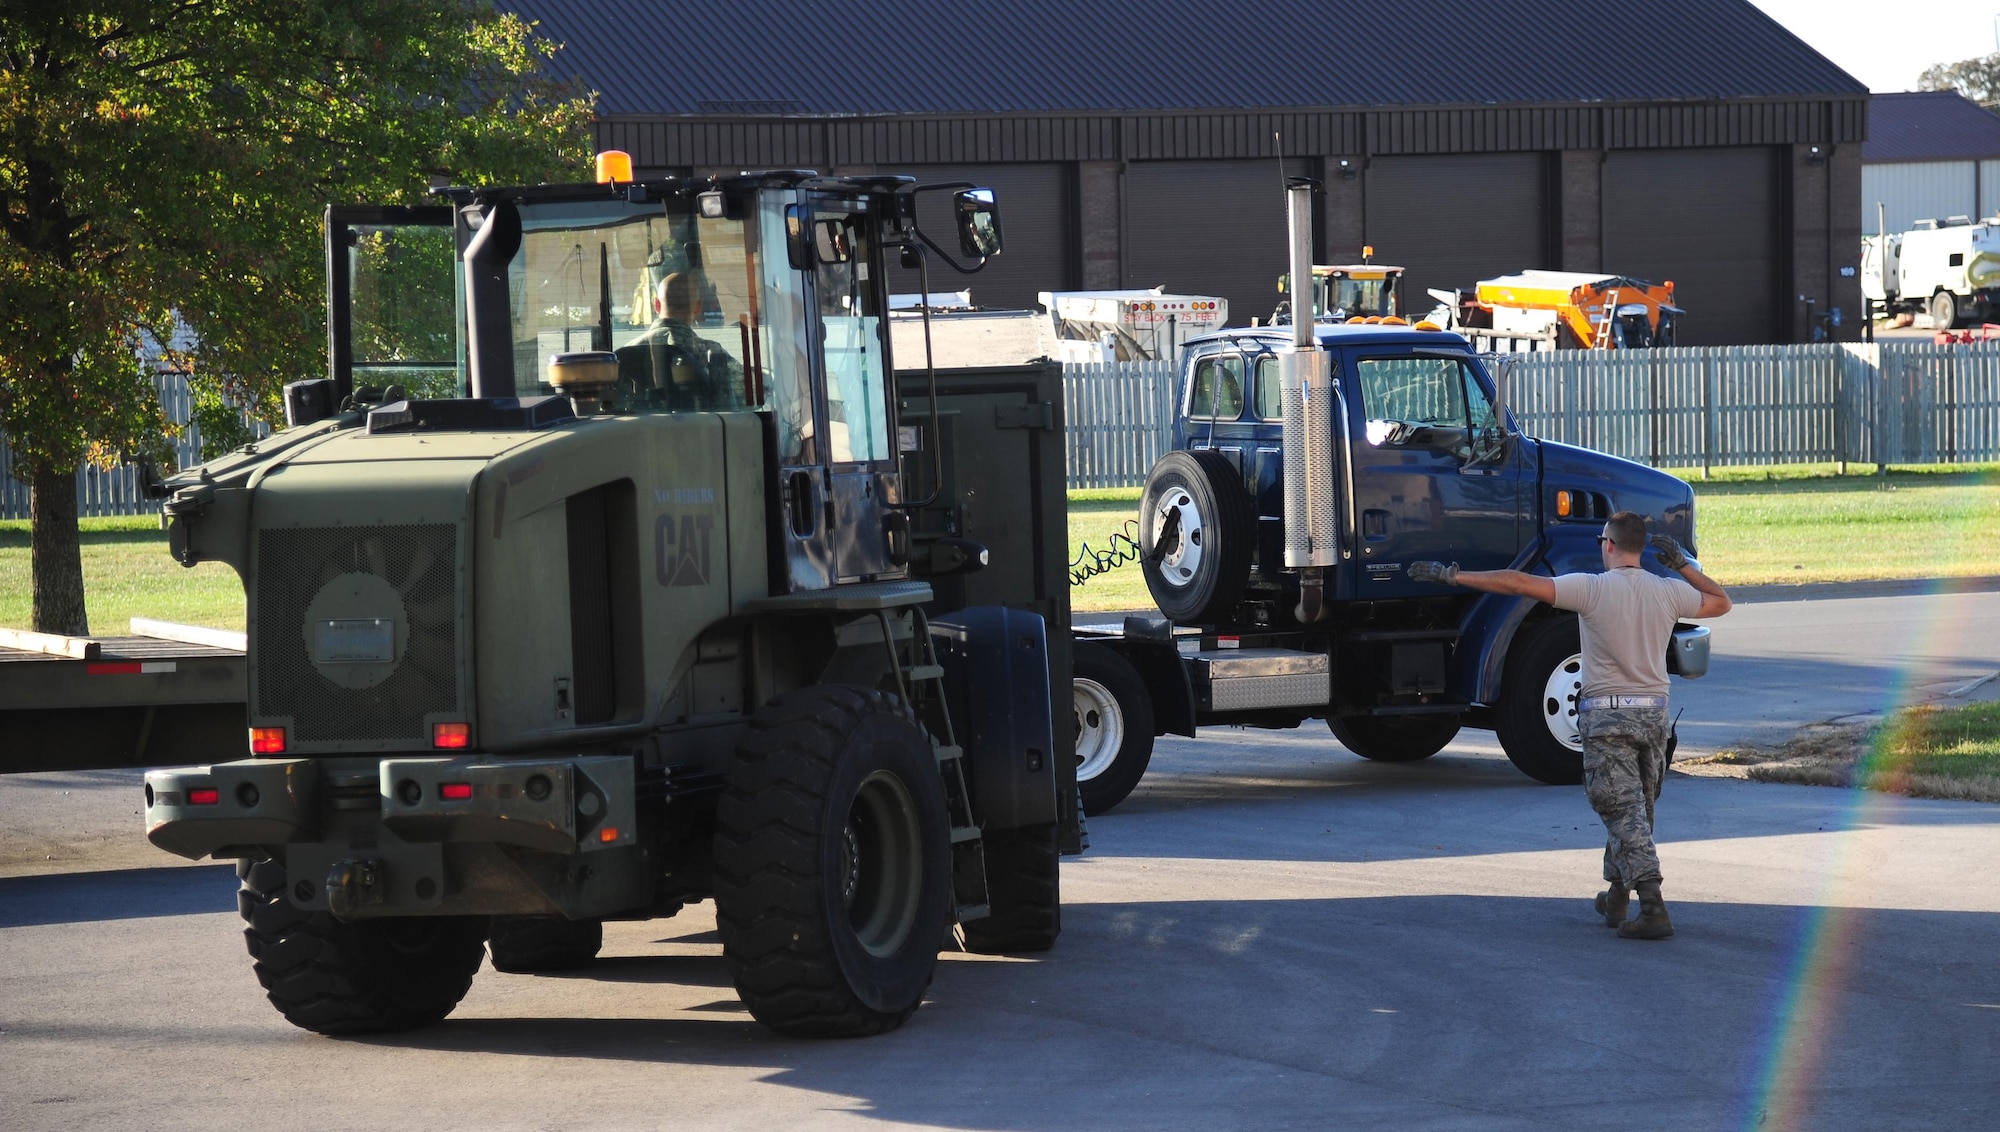 U.S. Air Force Senior Airman Robert Payne, a vehicle operator with the 509th Logistics Readiness Squadron, guides a fork-lift operator toward a truck to be loaded with personal protective equipment during exercise Global Thunder 17 (GT17) at Whiteman Air Force Base, Mo., Oct. 24, 2016. GT17 is an annual command and control exercise designed to train U.S. Strategic Command forces and assess joint operational readiness. (U.S. Air Force photo by Senior Airman Joel Pfiester)